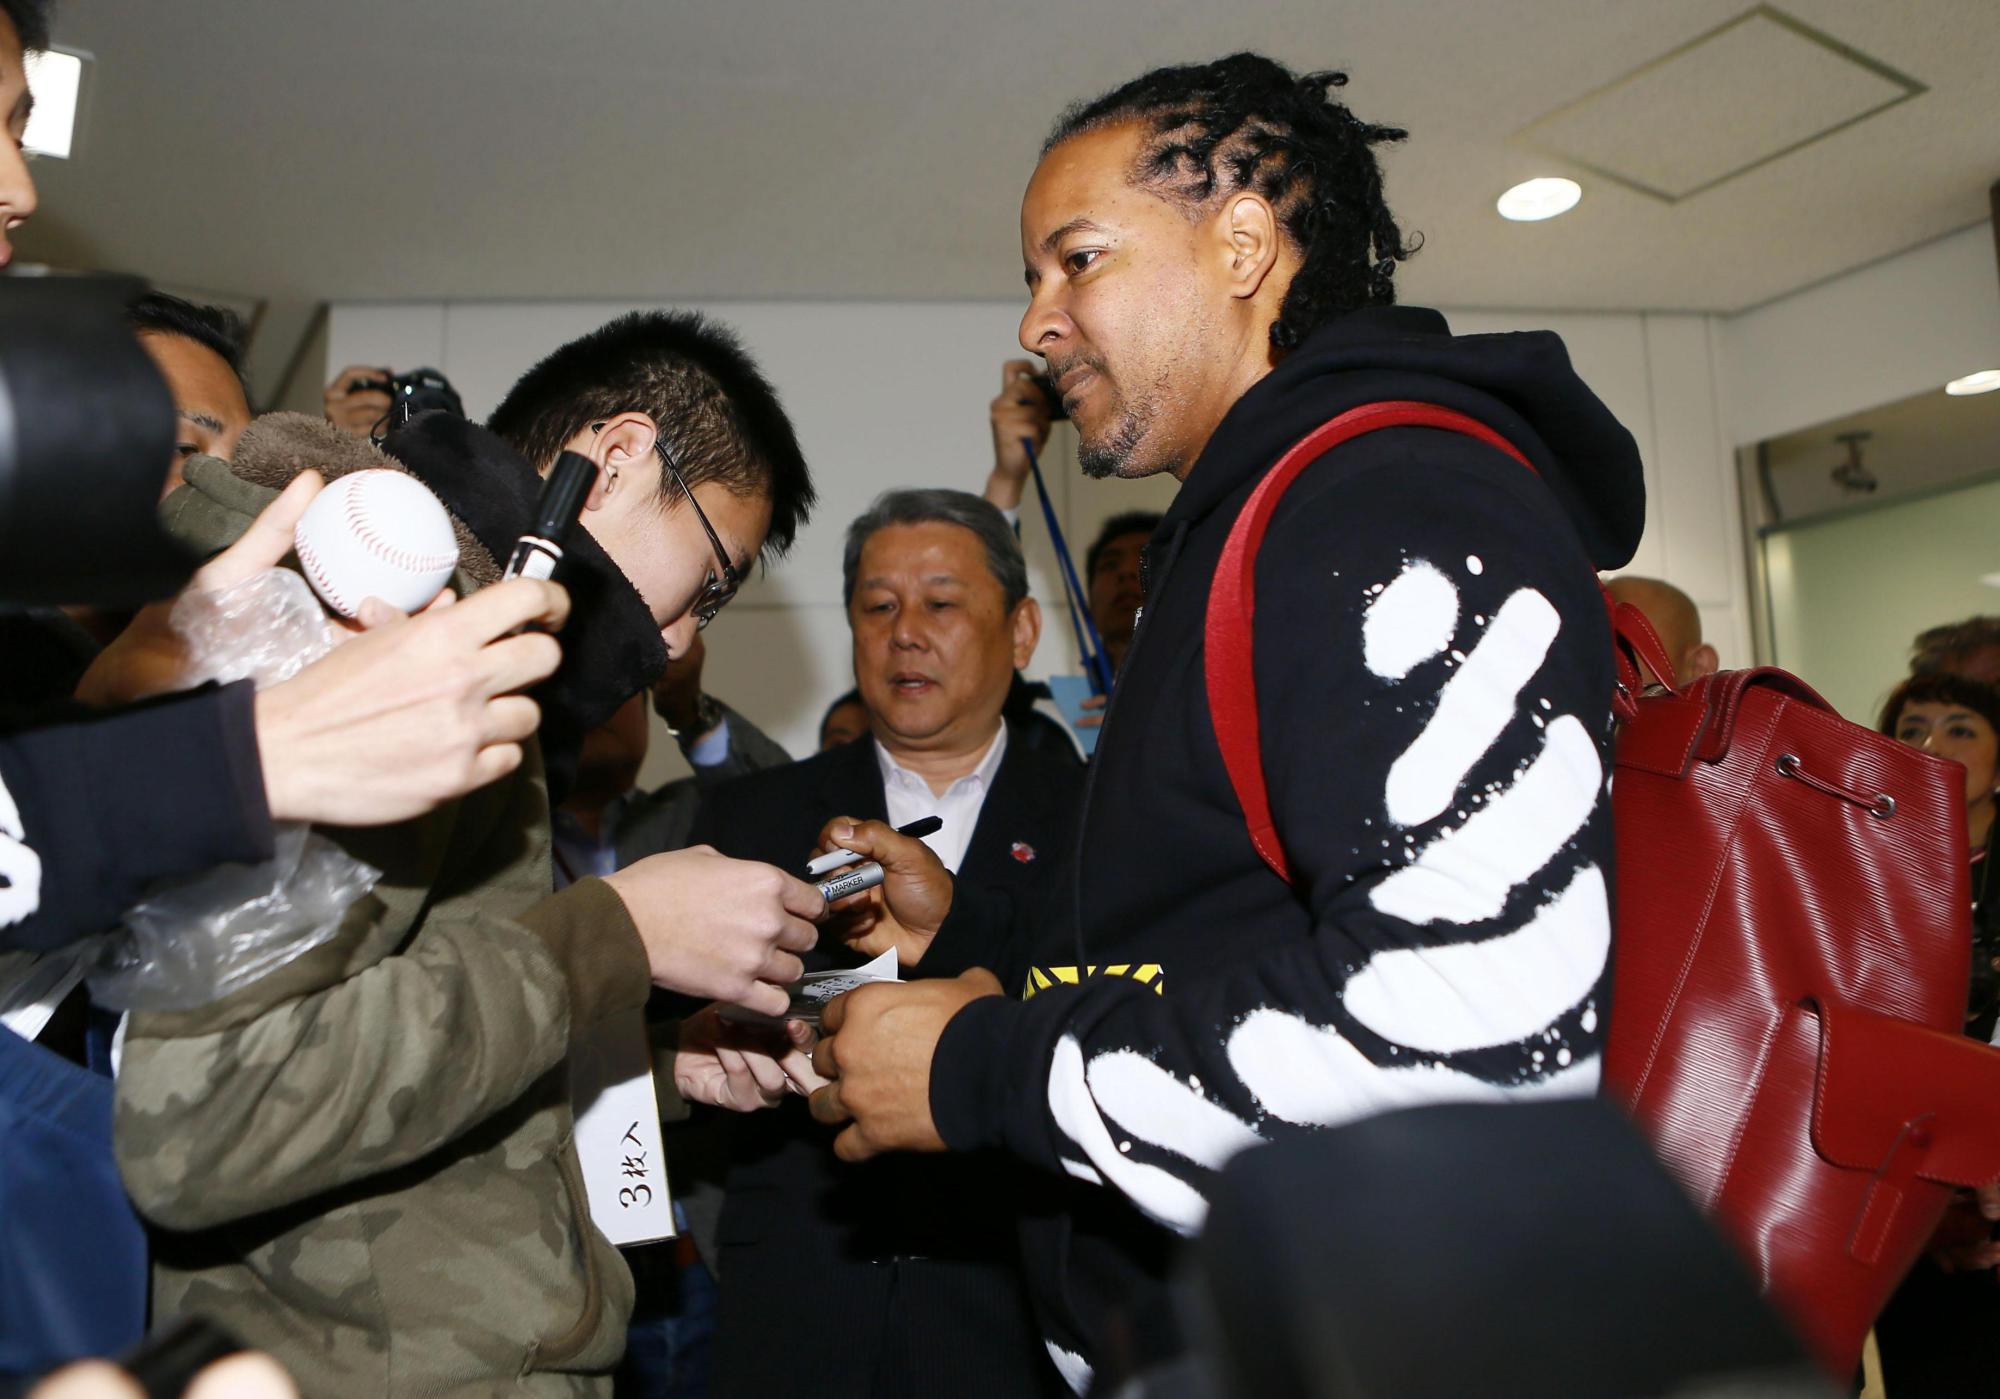 Manny Ramirez, former Boston Red Sox star now in Japan, has a